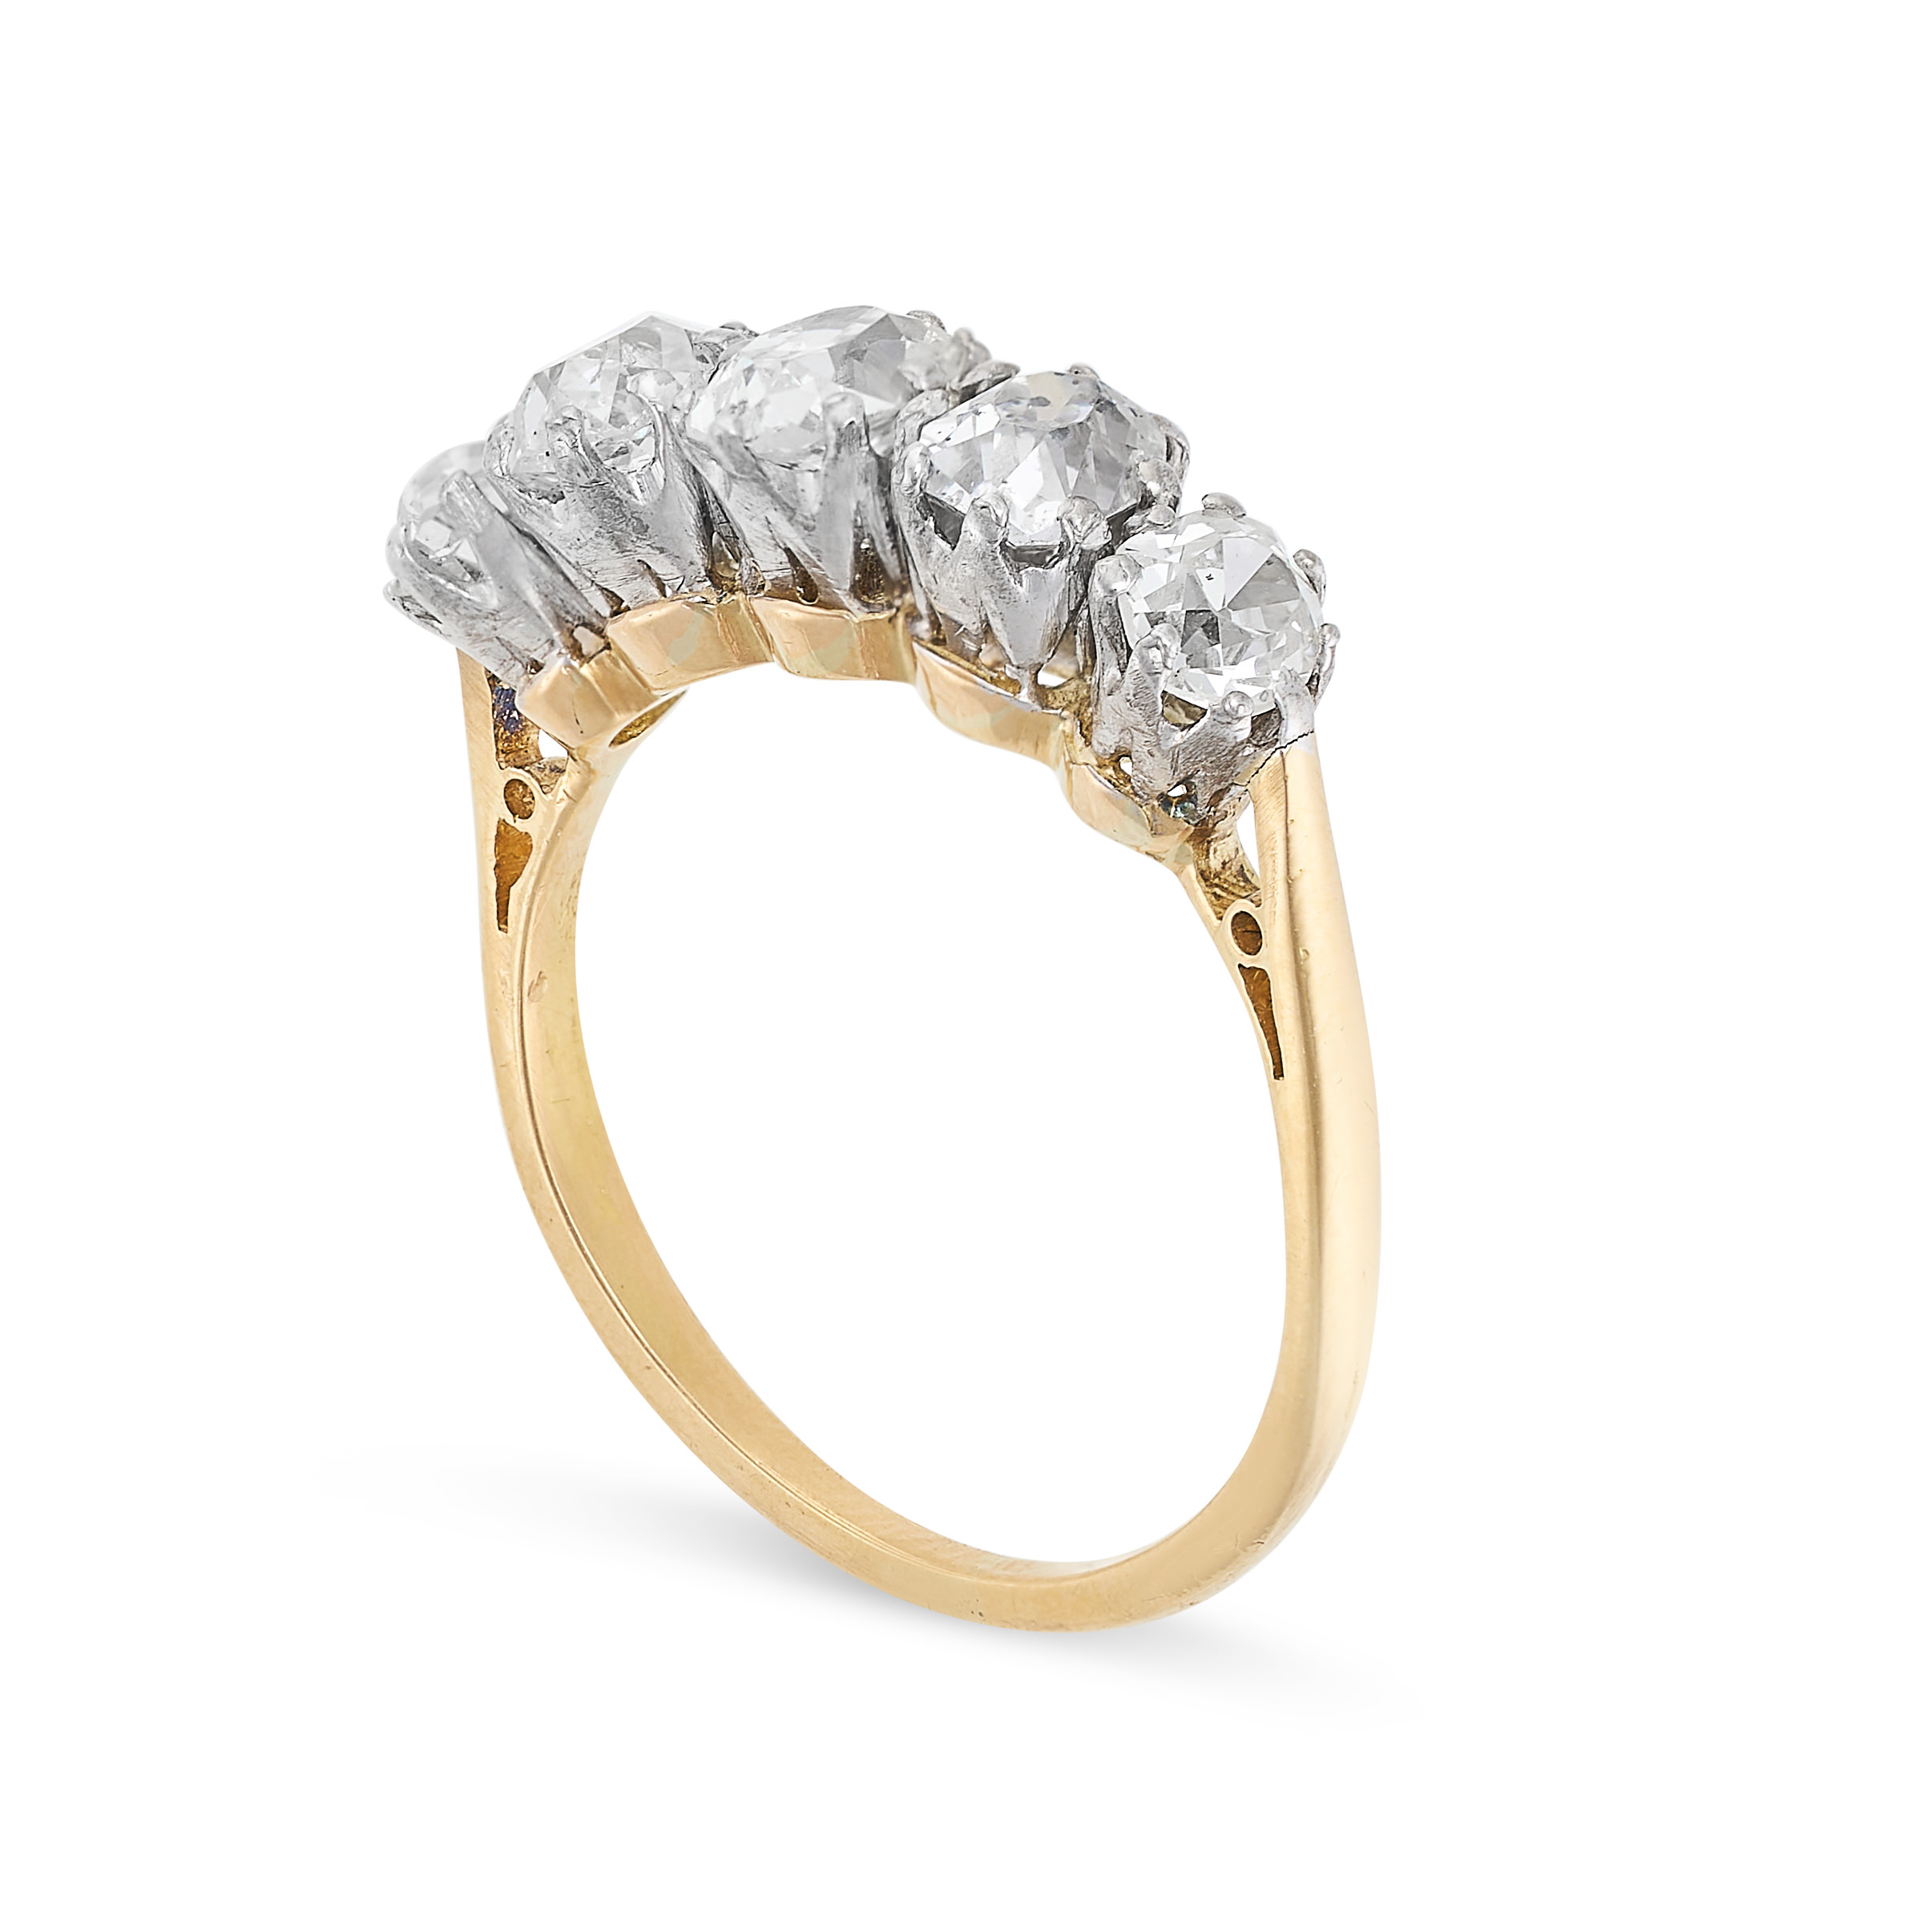 A DIAMOND FIVE STONE RING in 18ct yellow gold, set with five old cut diamonds all totalling 1.6-1. - Image 2 of 2